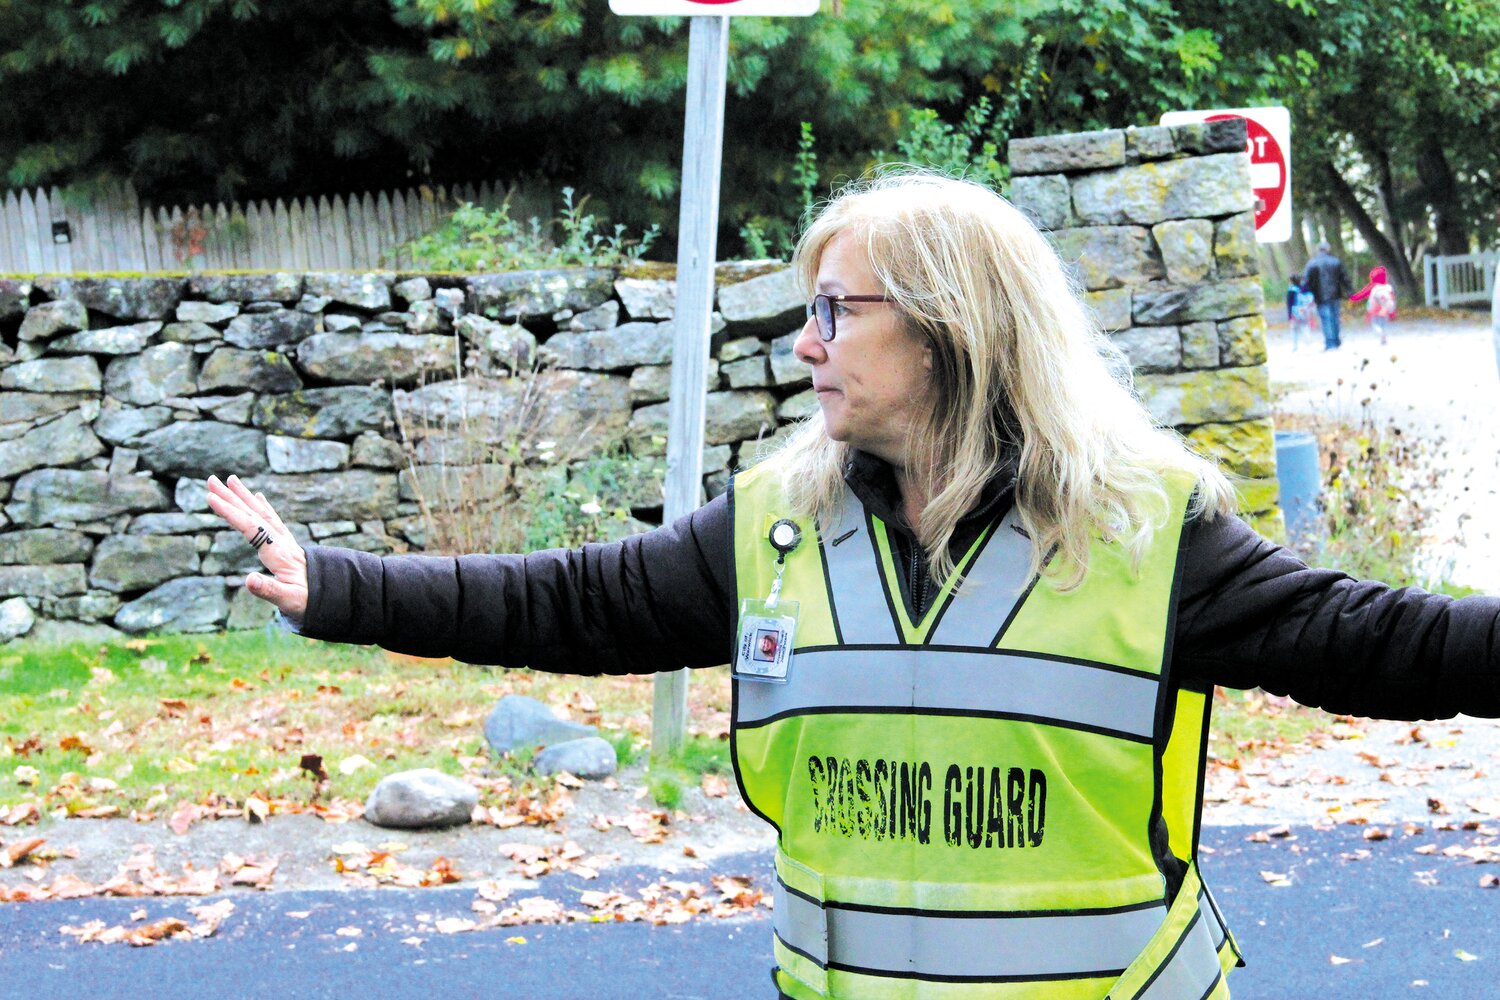 KEEPING THEM SAFE:   Crossing guard Julie Peters directs traffic on Rocky Point Avenue with an ever mindful eye on safety.